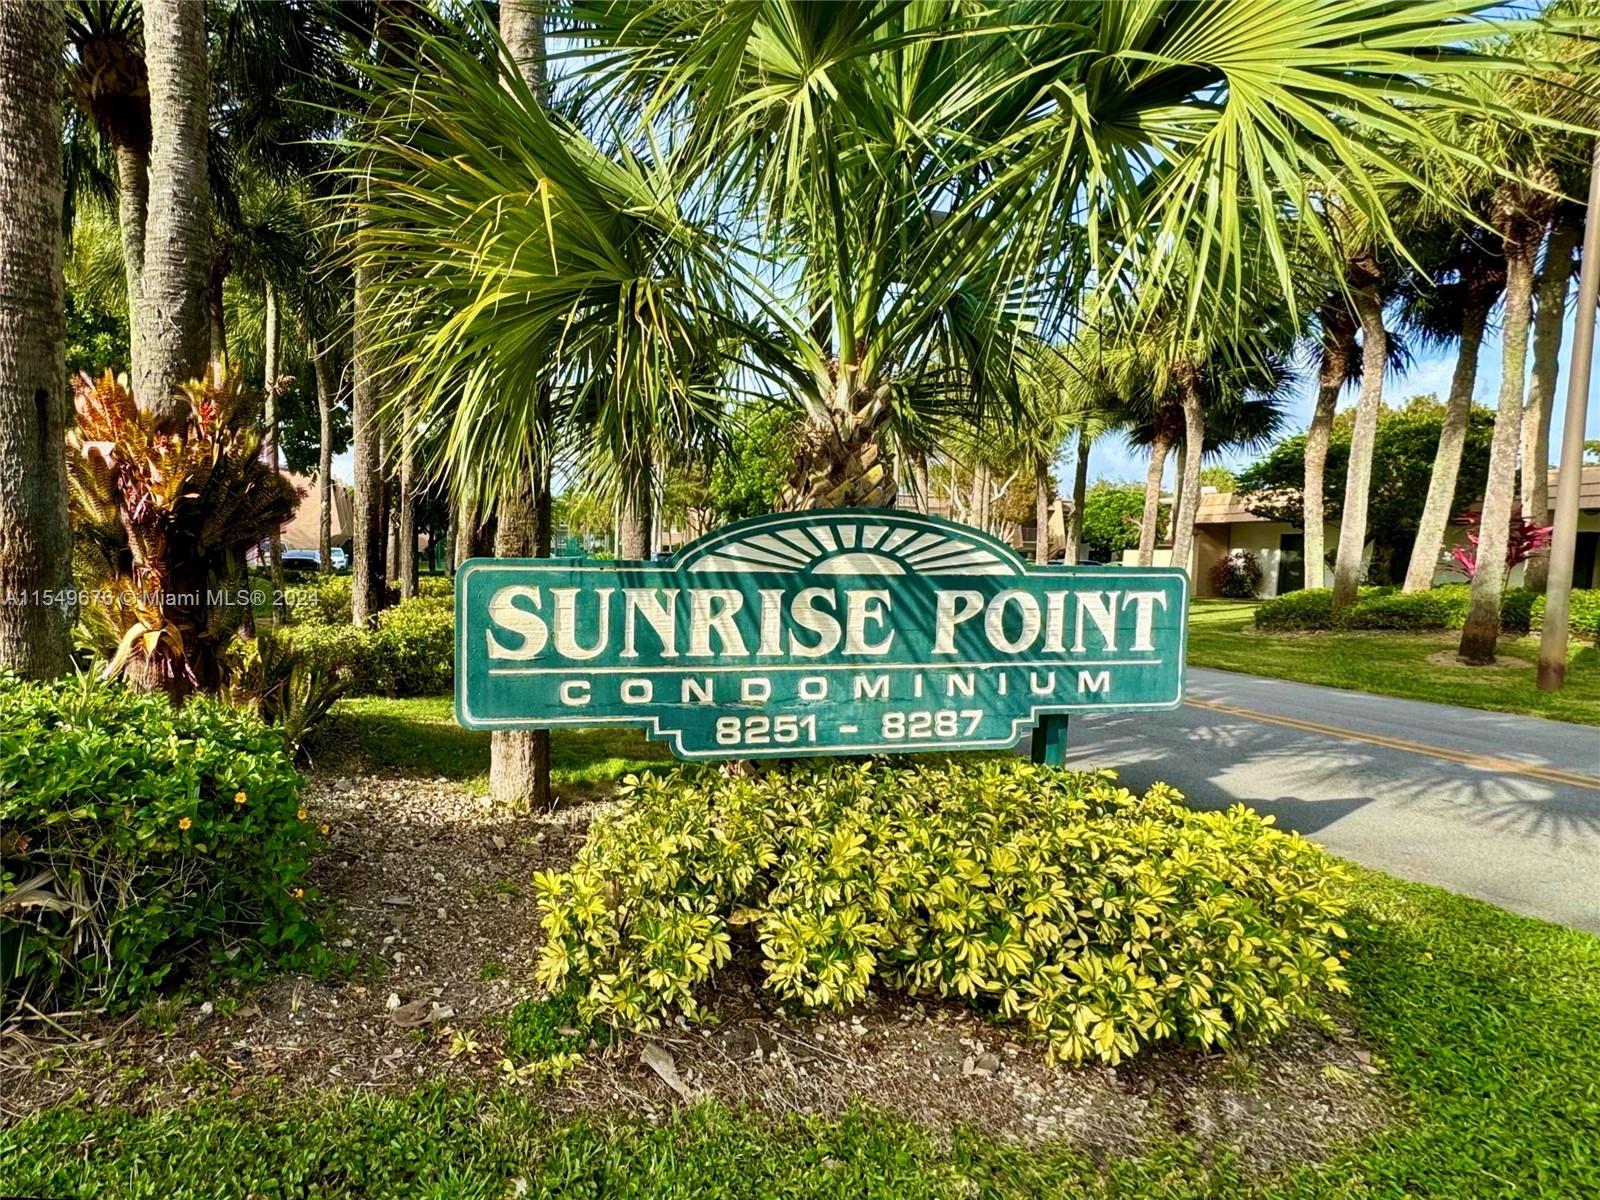 Beautiful corner unit in the Pinecrest community of Sunrise Point. Three bedrooms, two bathrooms. Vibrant and inviting with a bright and open design. All Palmetto schools. Clubhouse, pool, tennis court, exercise room and BBQ area. Located upstairs with a garden court view and storm shutters throughout. Evelyn Greer Park entrance is onsite and Suniland Park is across the street. Residents have one reserved parking spot and many guest spaces. Dadeland and The Falls are nearby, along with great neighborhood dining, shopping and entertainment. Experience the best of South Florida living. One pet allowed.